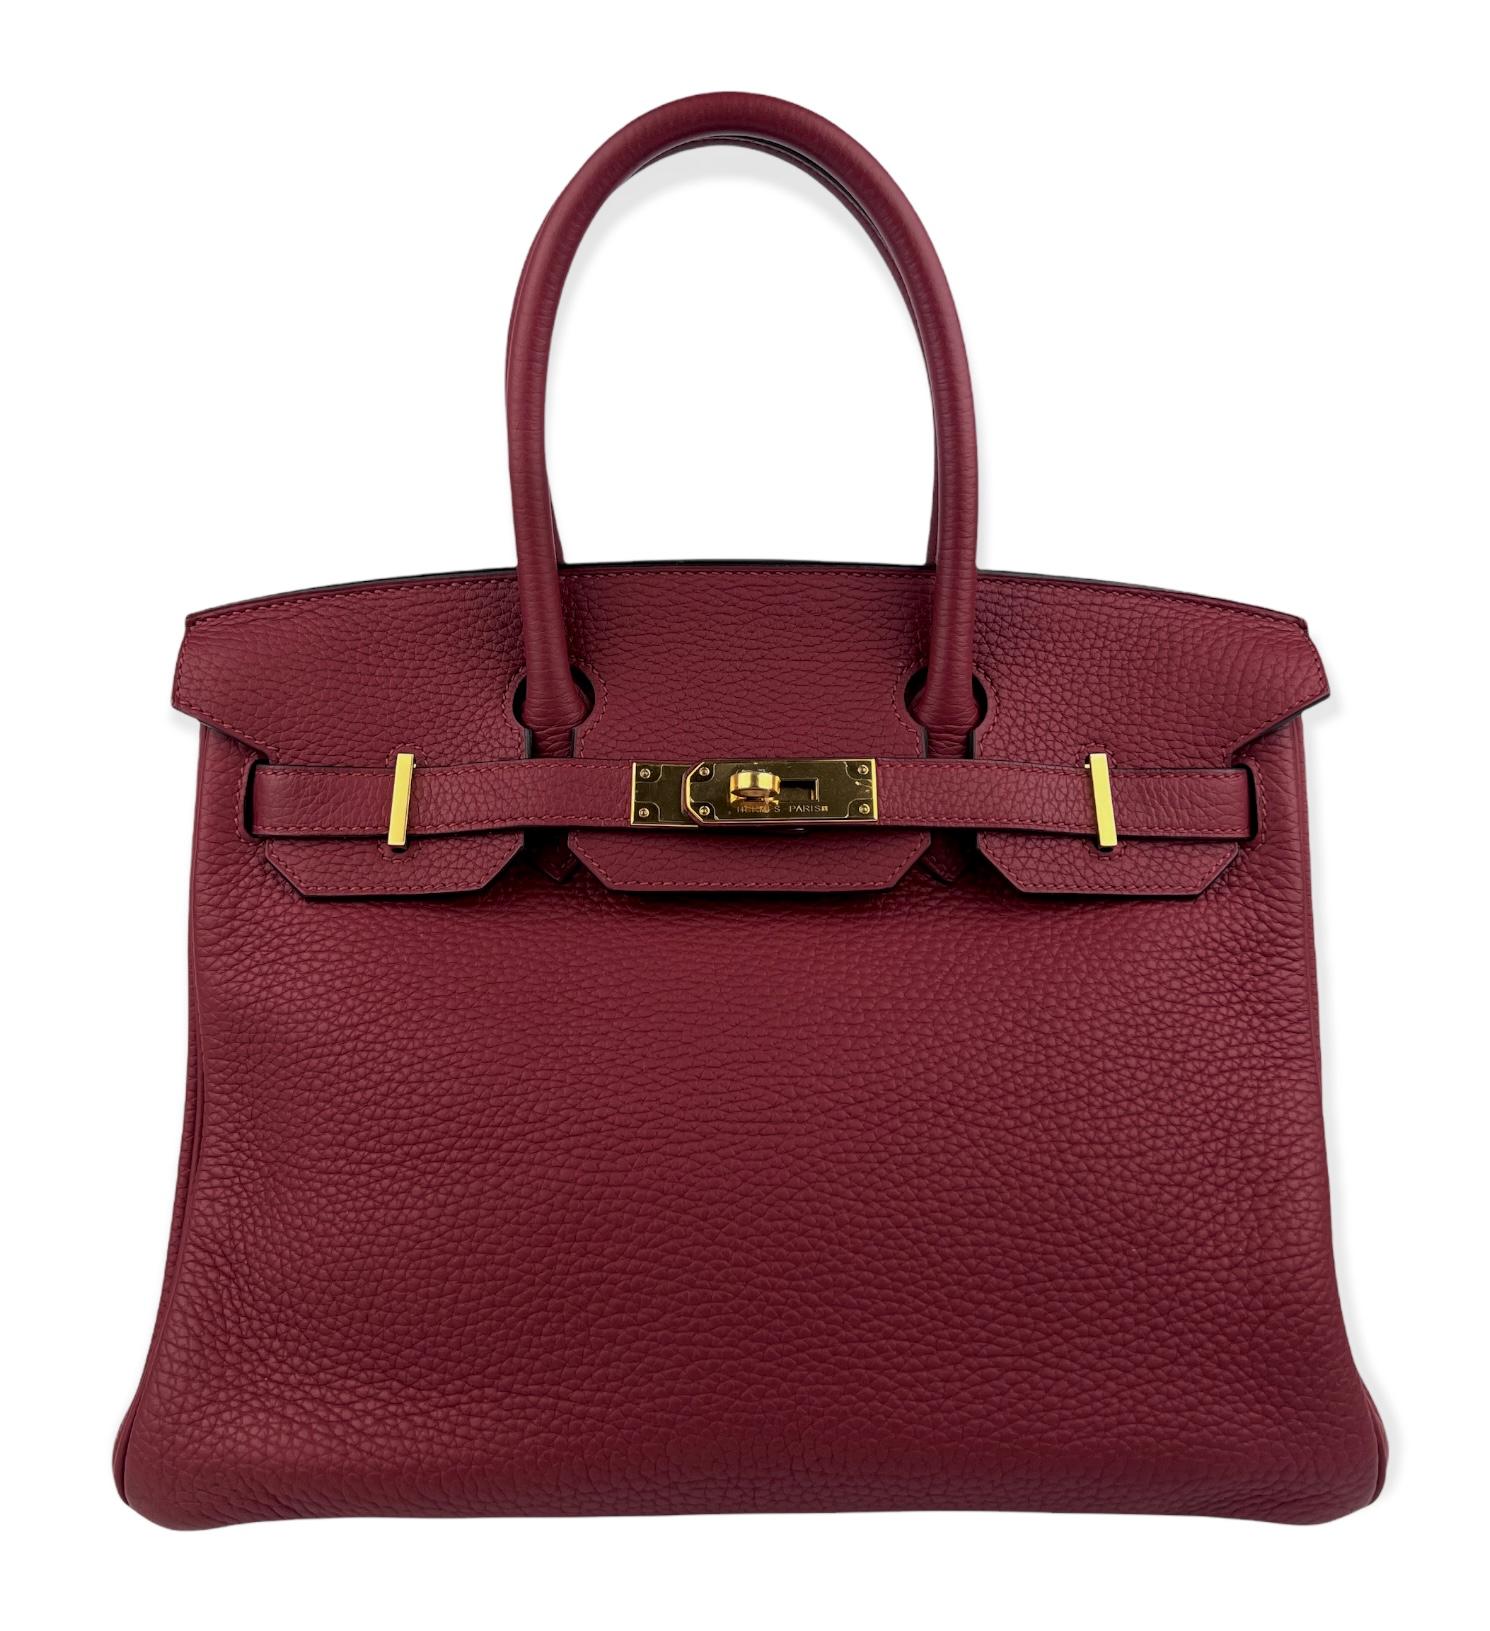 Stunning Hermes Birkin 30 Rouge Grenat complimented by Gold Hardware. Excellent Pristine Condition with Plastic on Hardware. 2016 X Stamp. 

Shop with Confidence from Lux Addicts. Authenticity Guaranteed! 